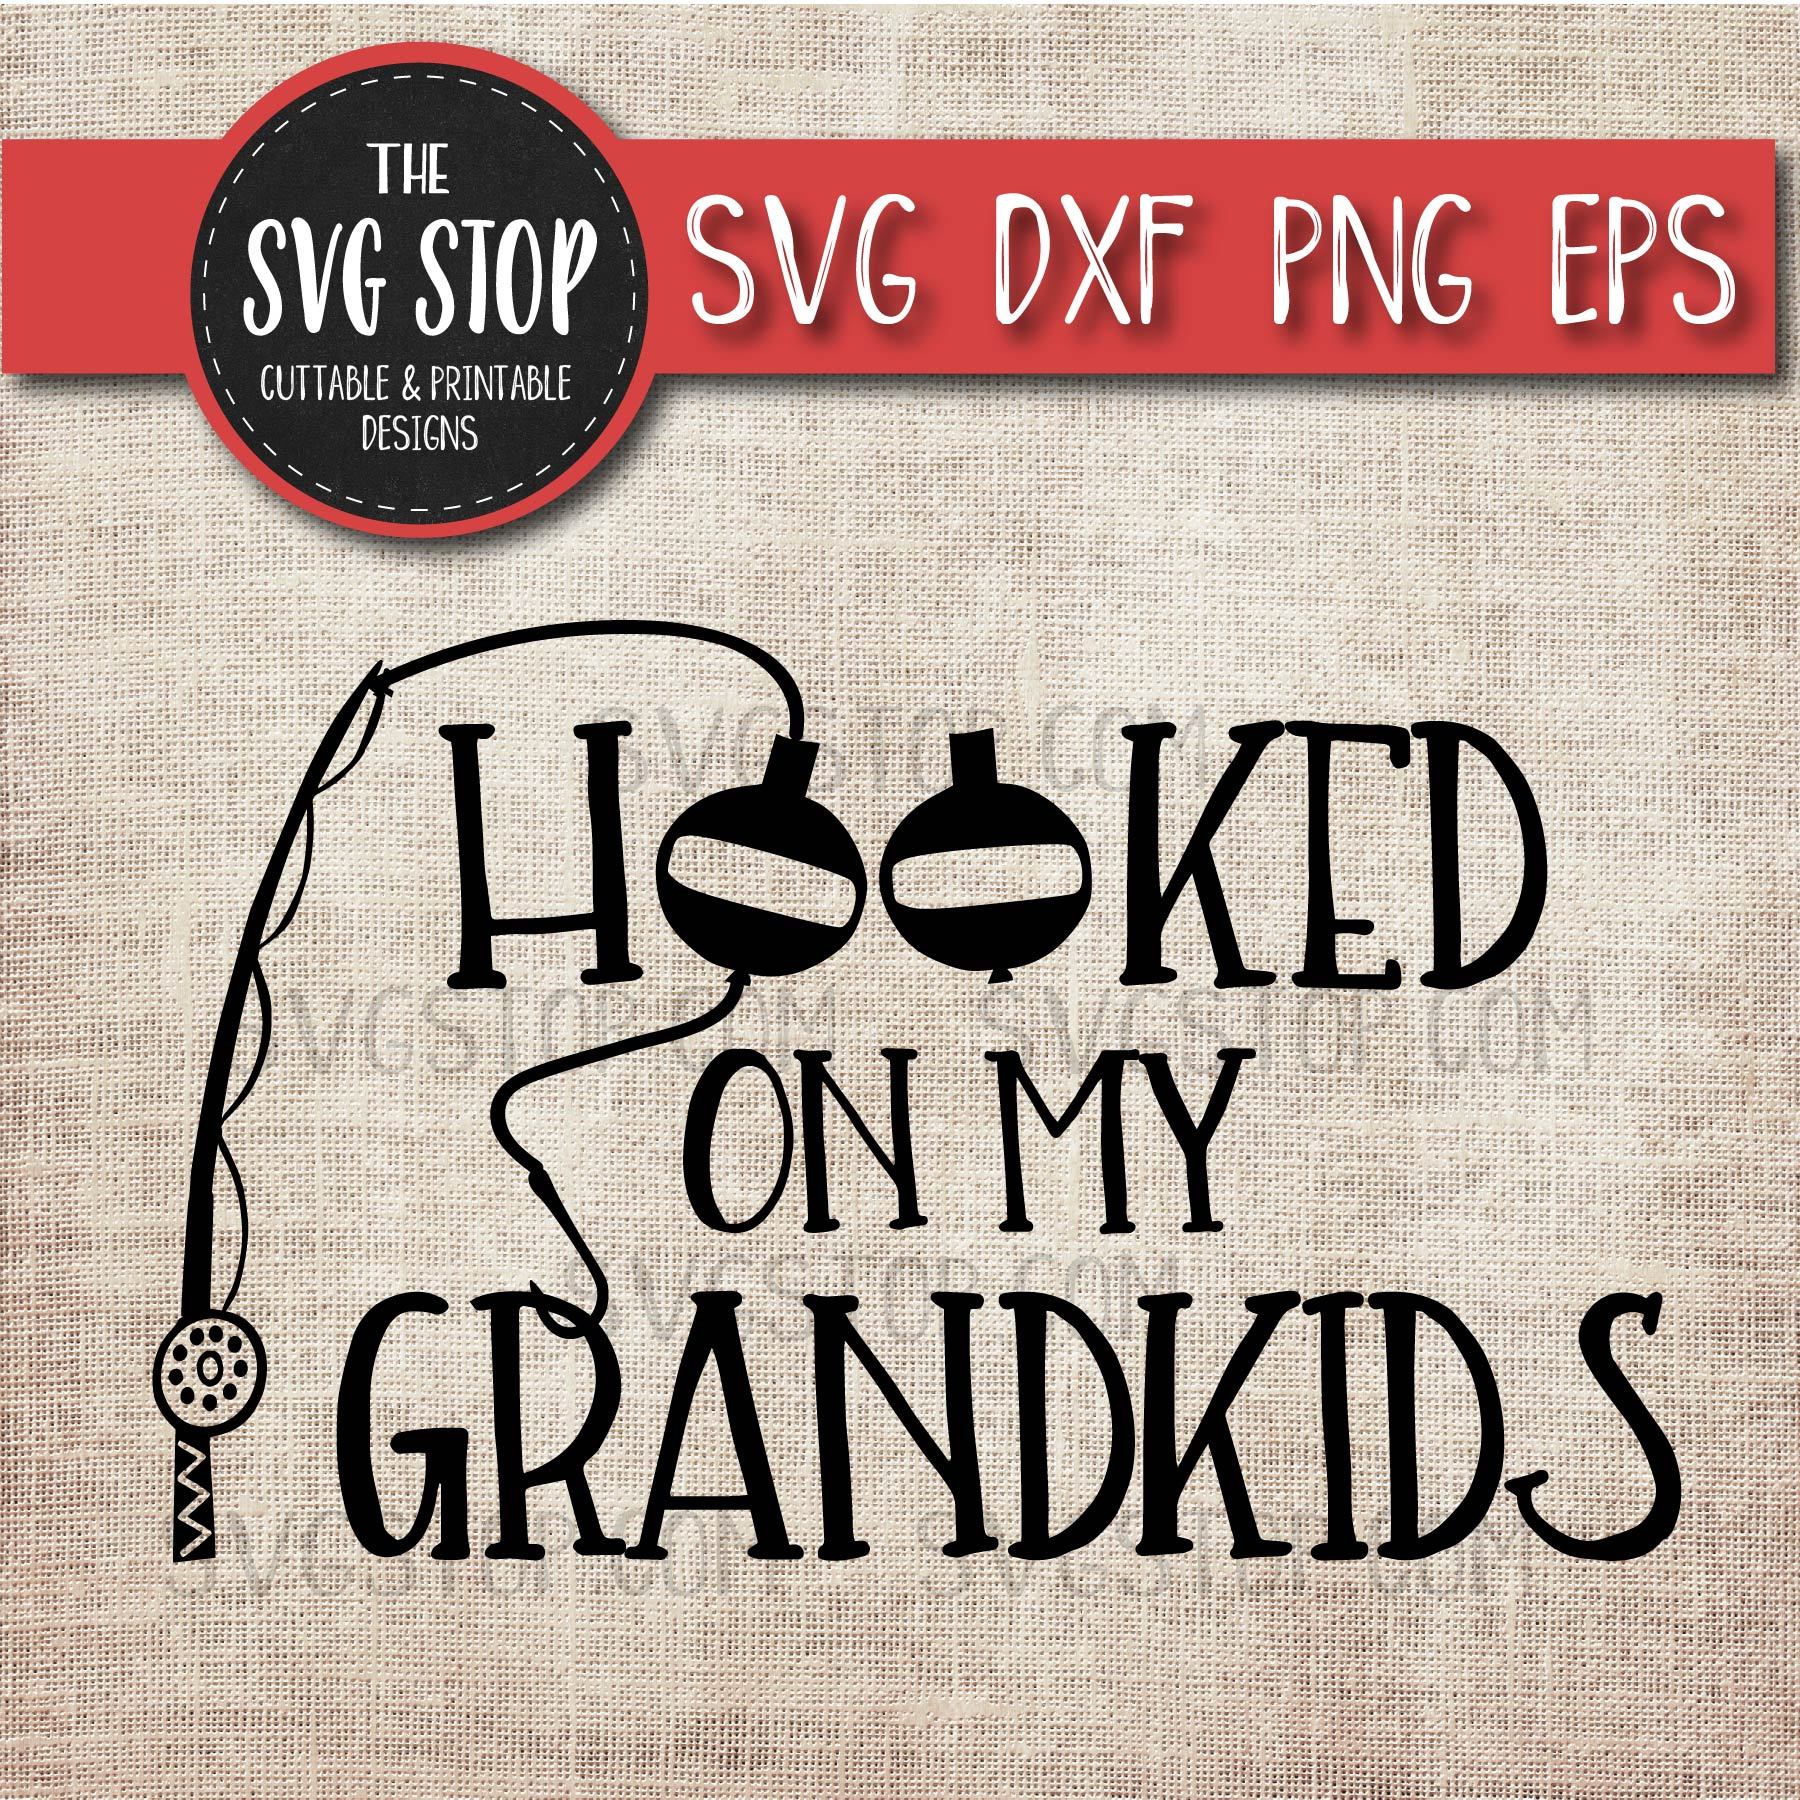 Download Hooked On Daddy Svg Hooked On Grandpa Svg Fishing Pole Svg Baby Svg Kids Svg Commercial Use Svg Cut File Clipart Dxf Eps Png Craft Supplies